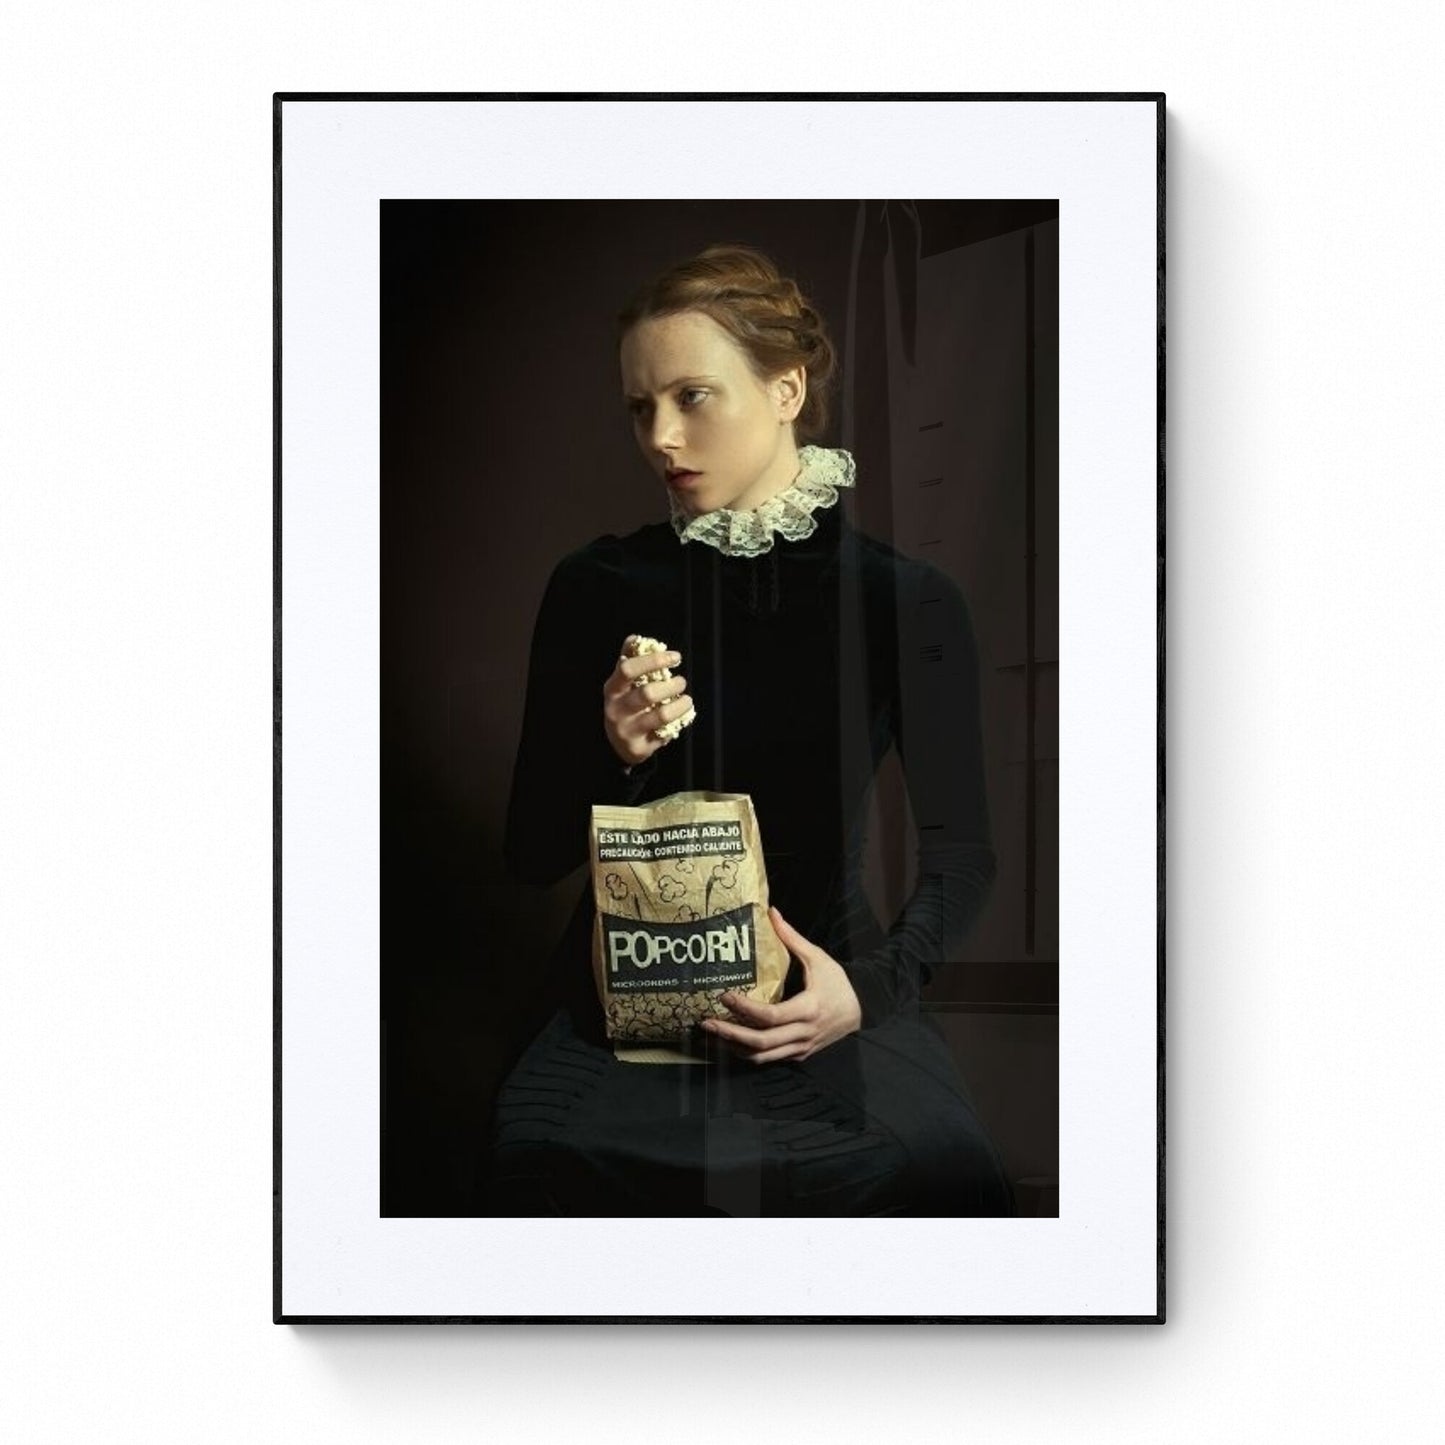 Romina Ressia - Pop Corn - Sold out edition